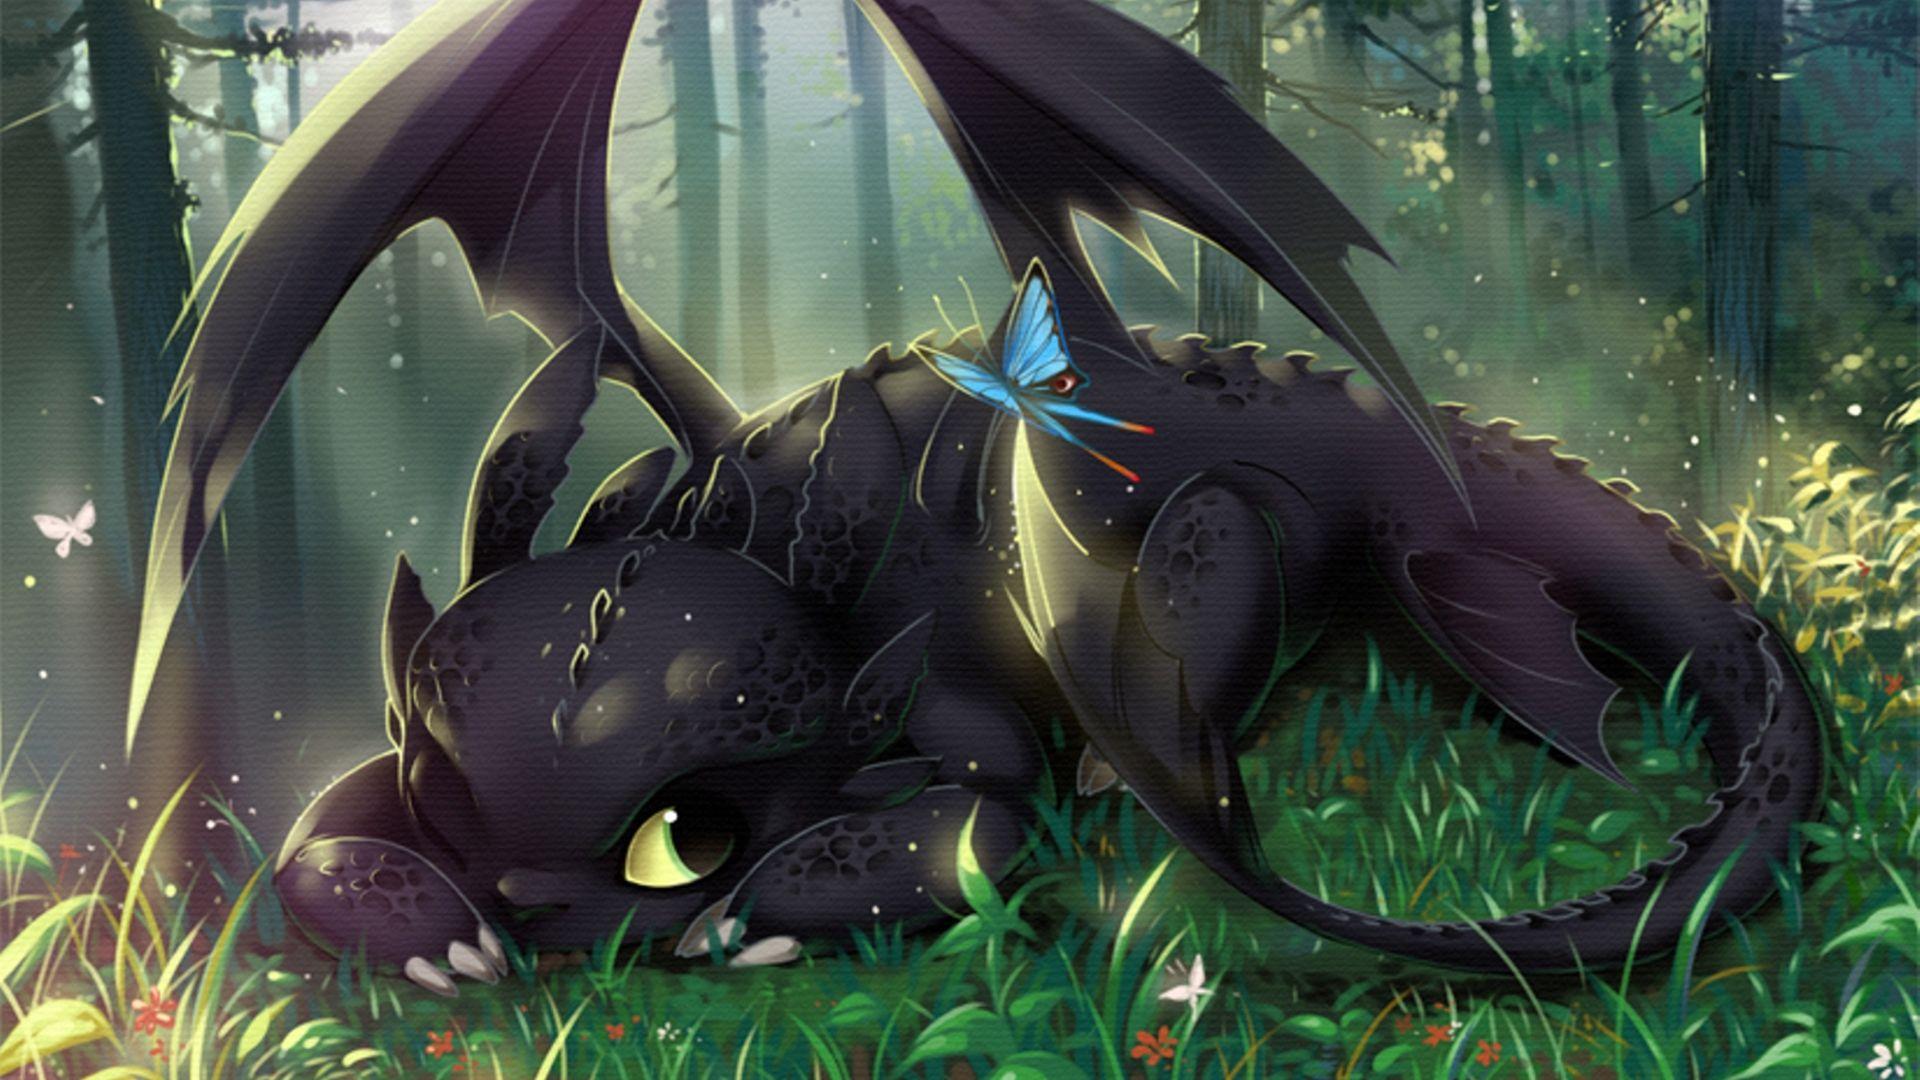 Download the Toothless and Butterfly Wallpaper, Toothless